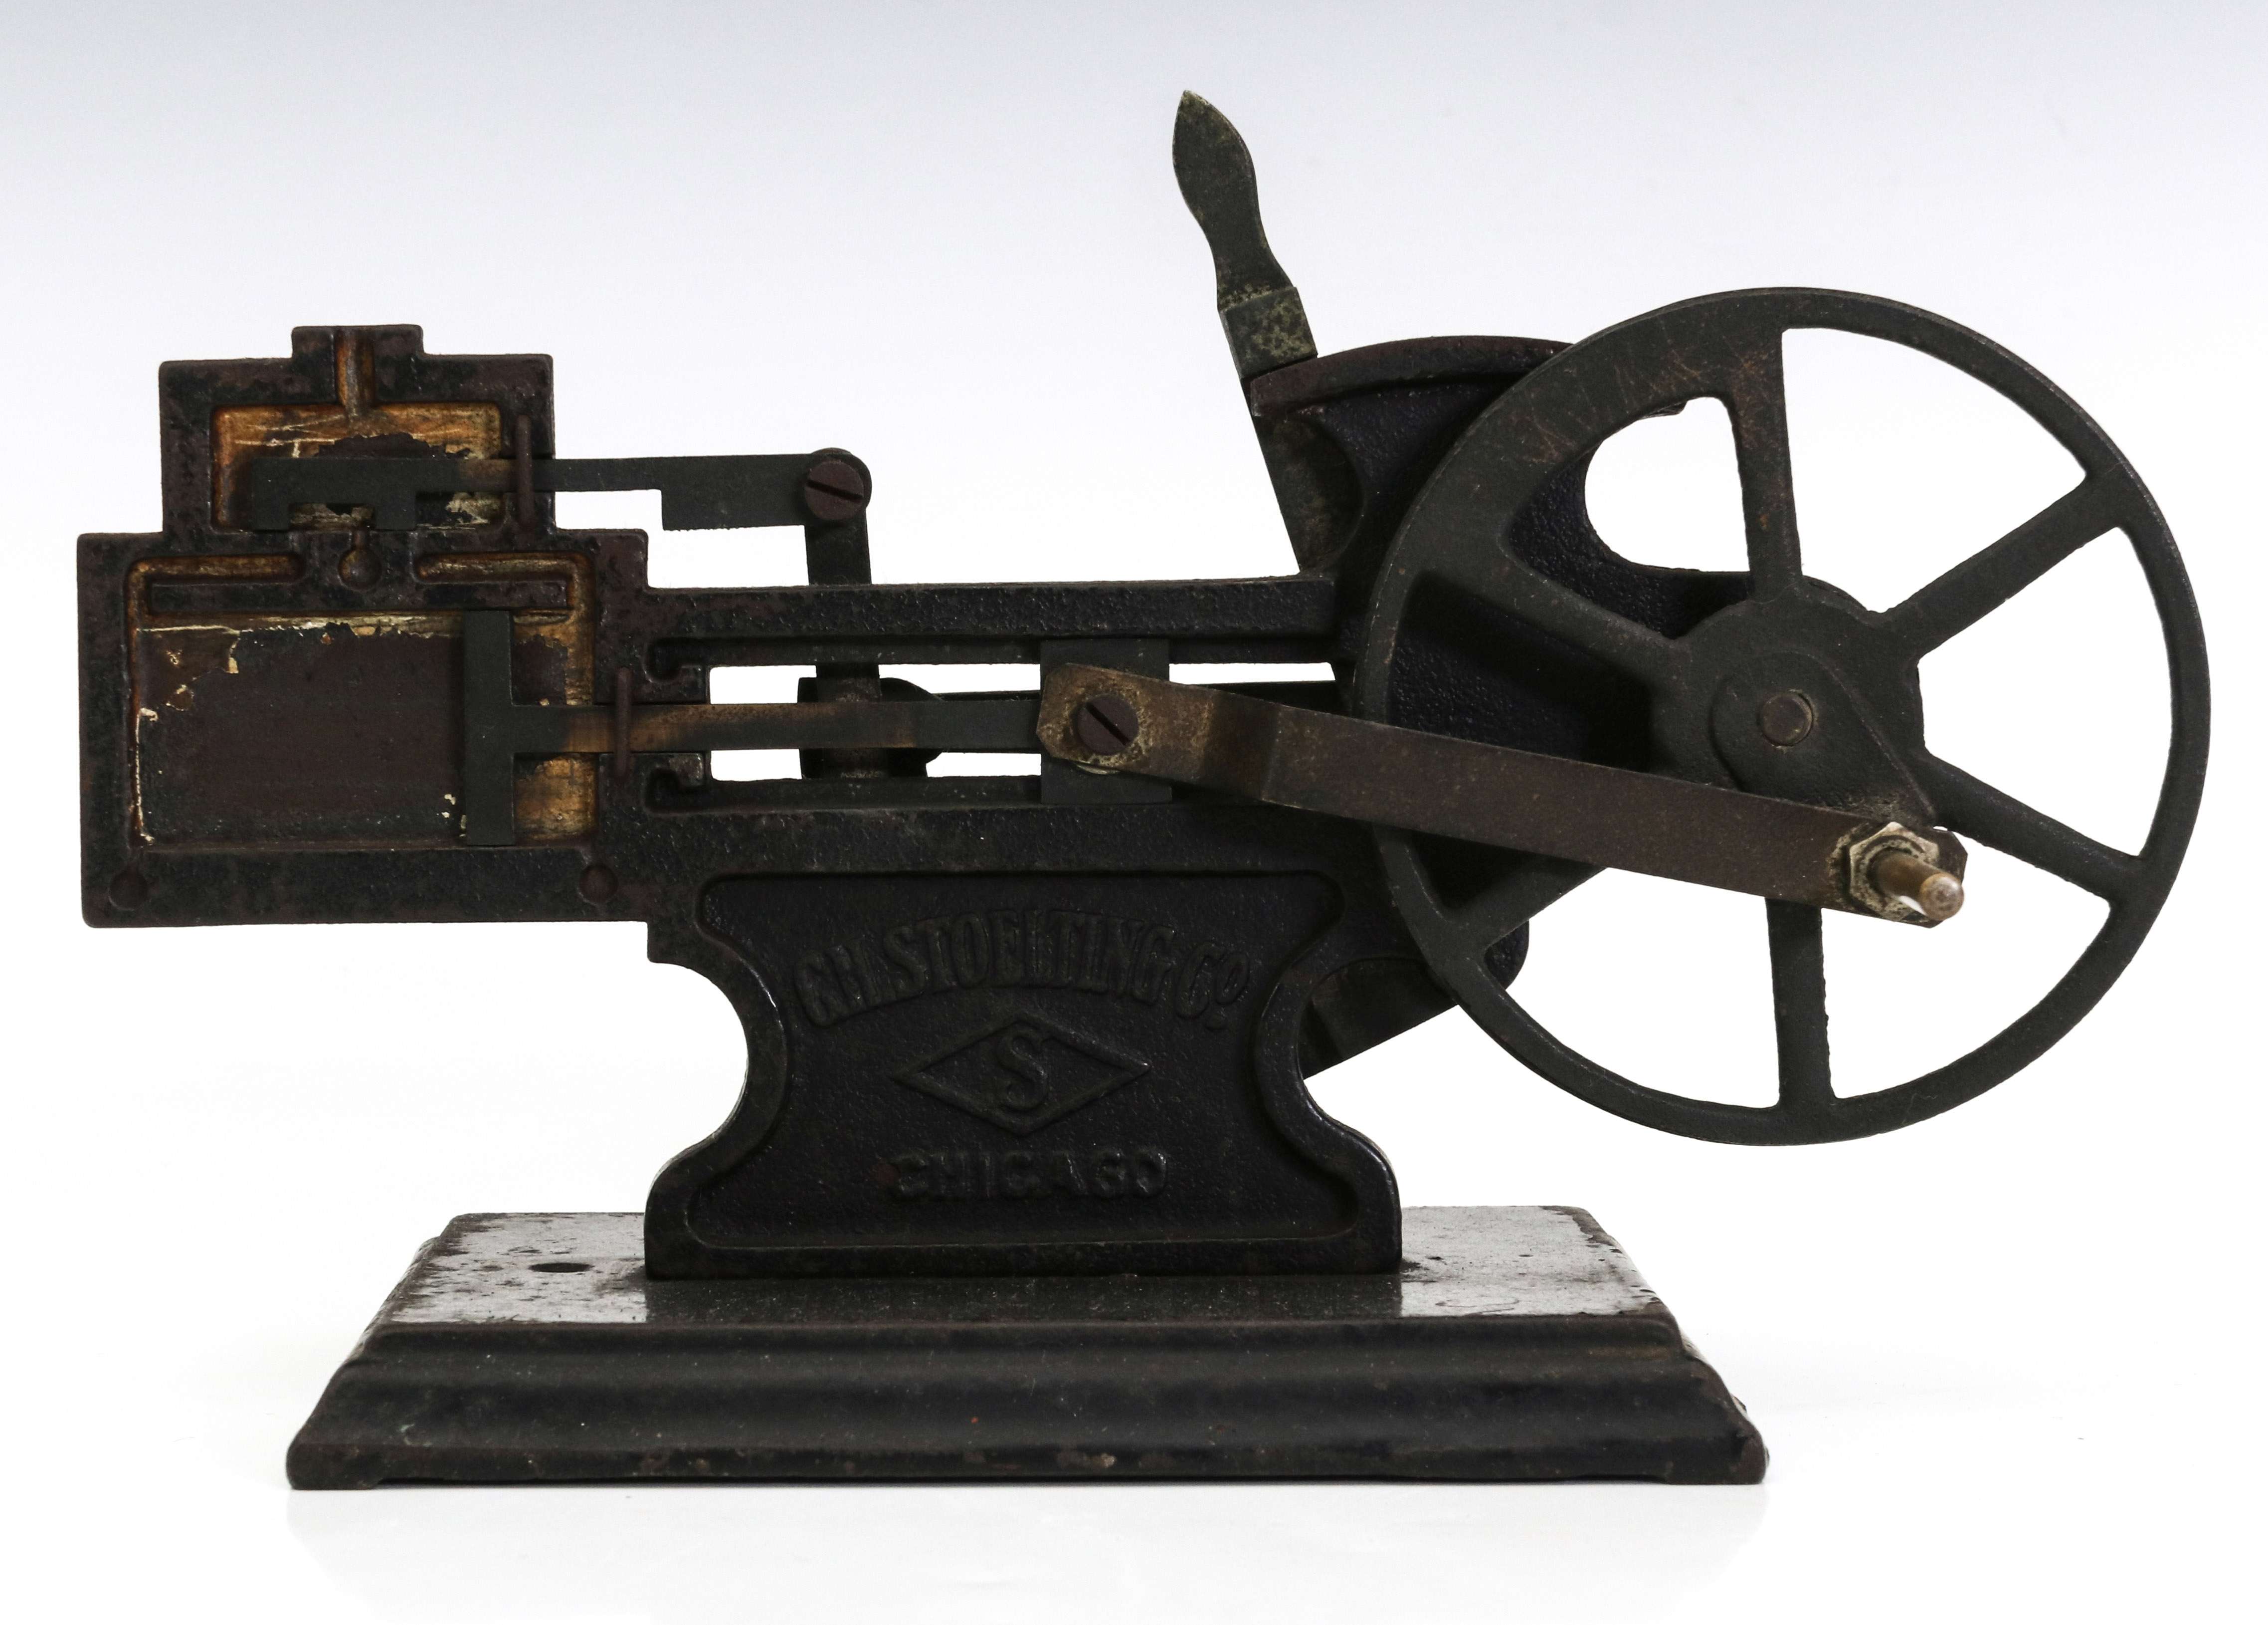 A LATE 19TH C. STOELTING STEAM ENGINE DEMONSTRATOR